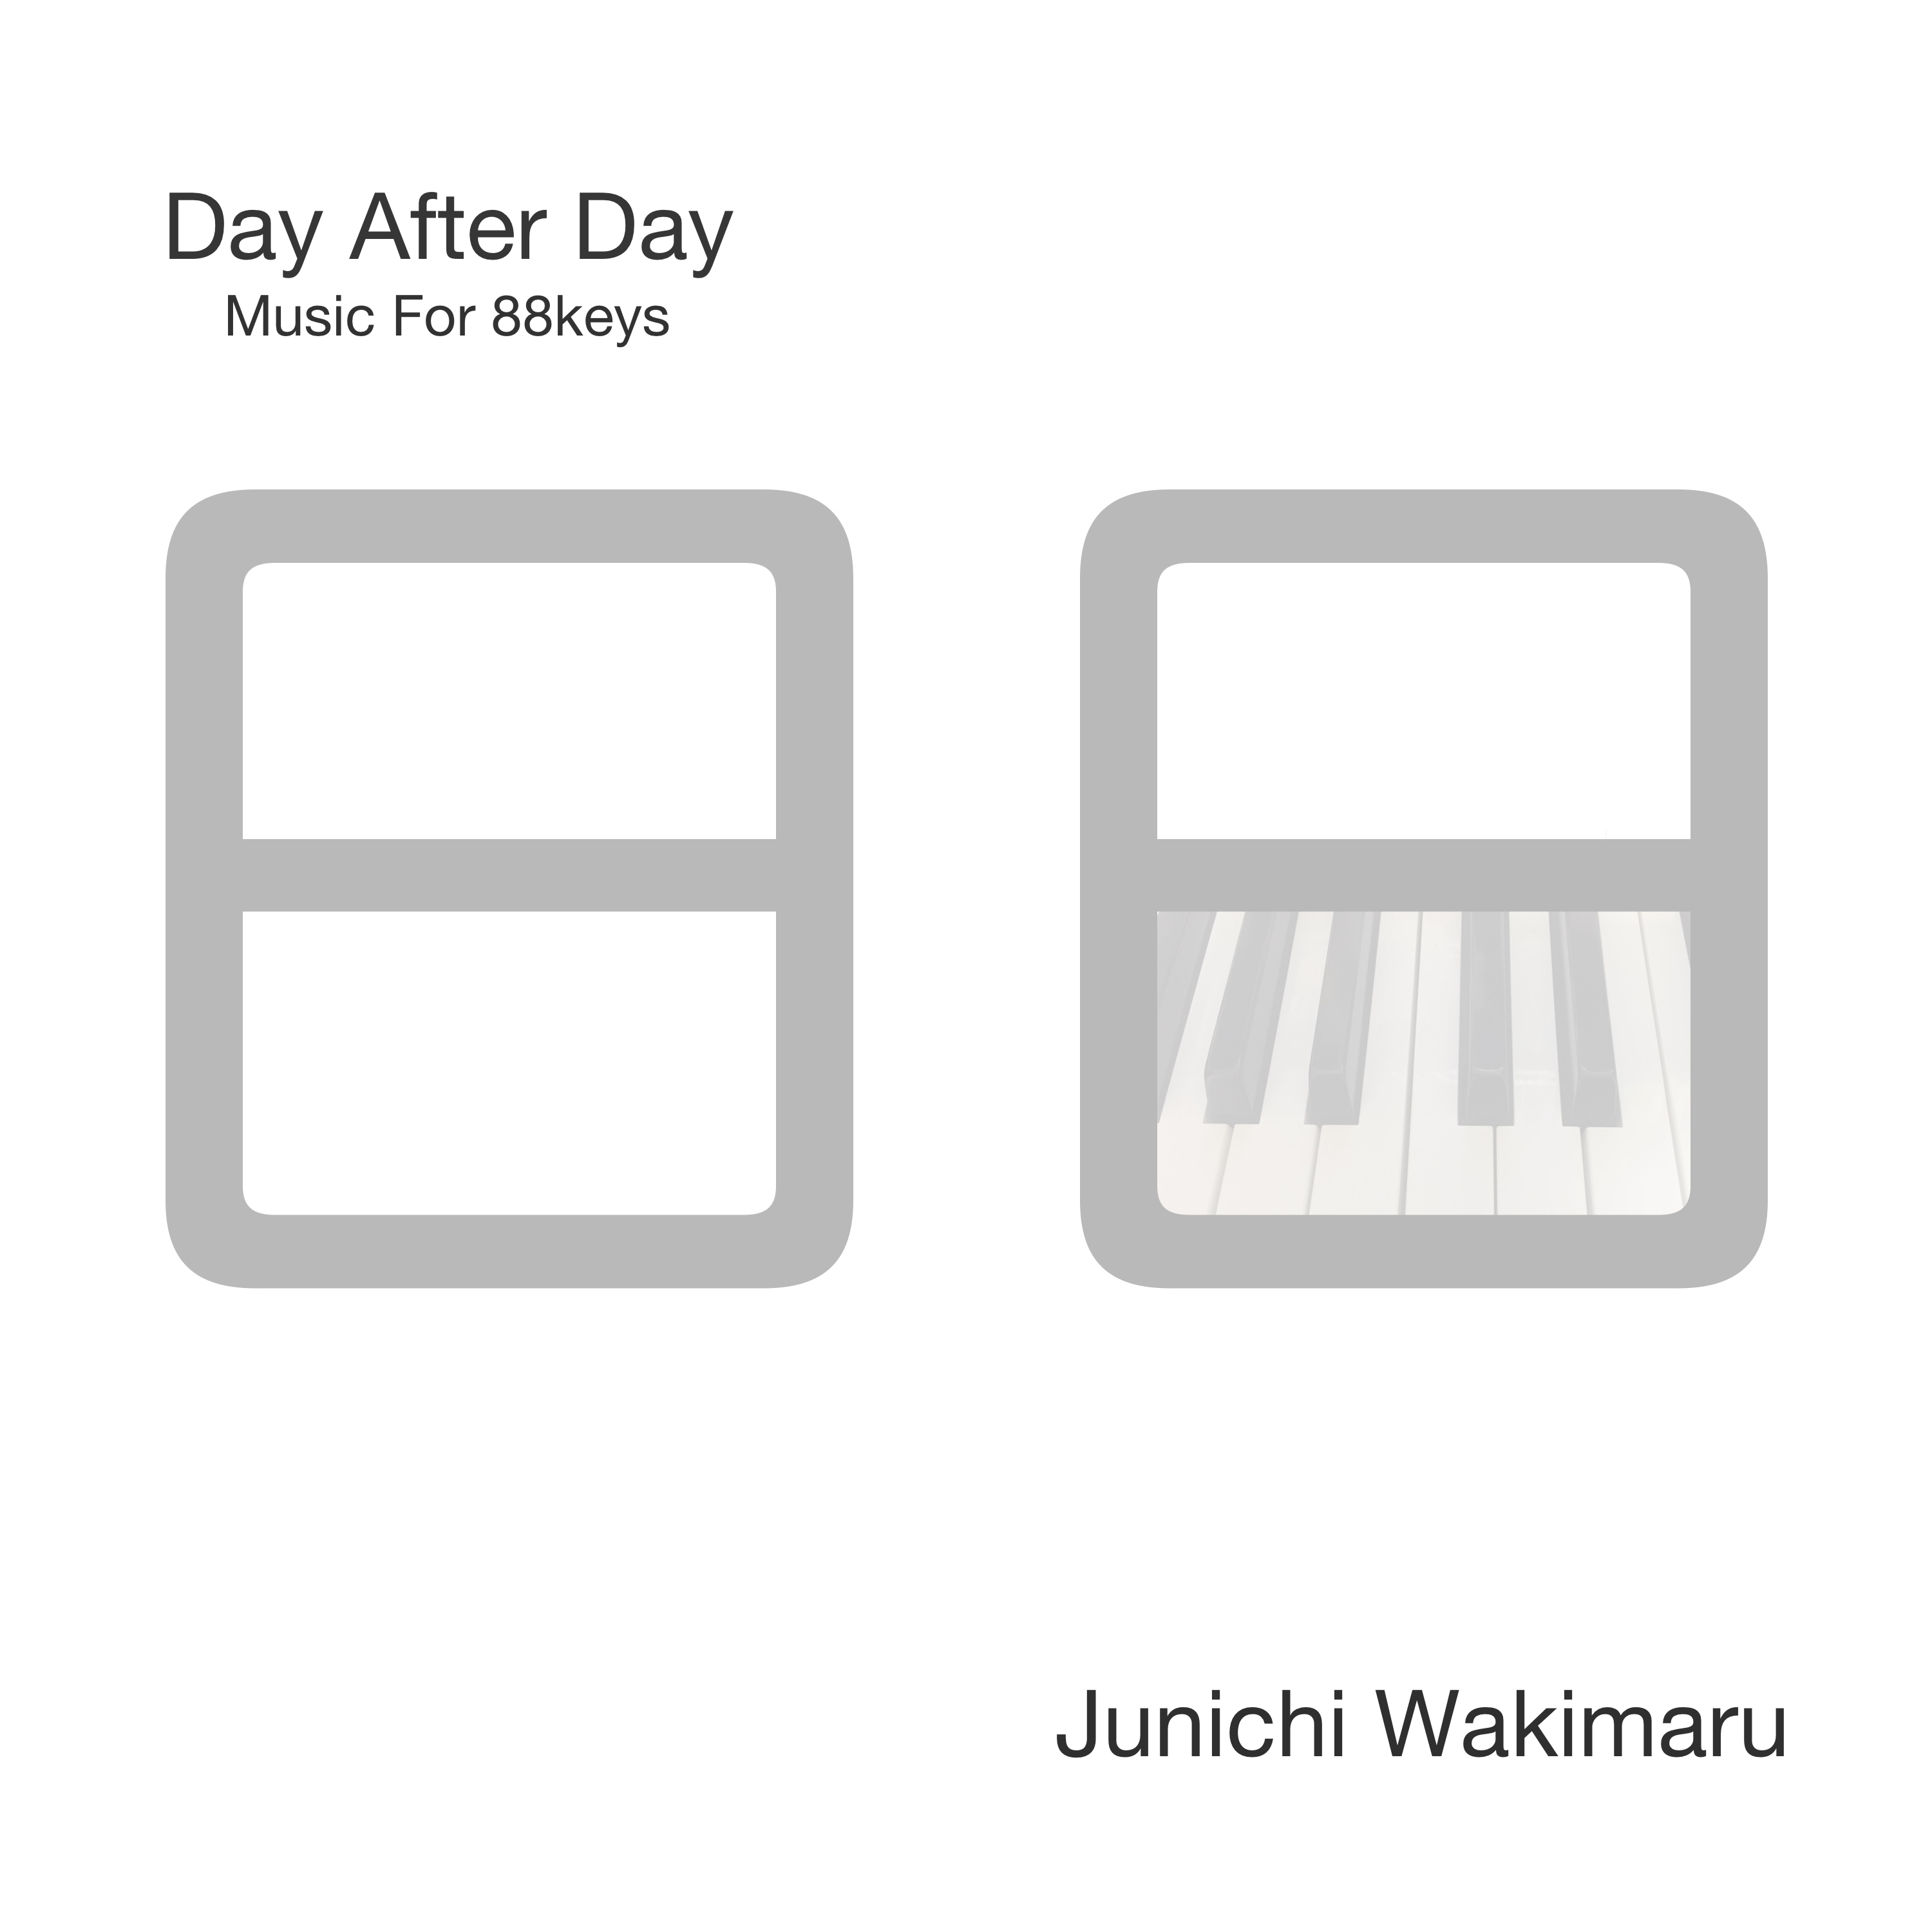 Day After Day -Music For 88keys-